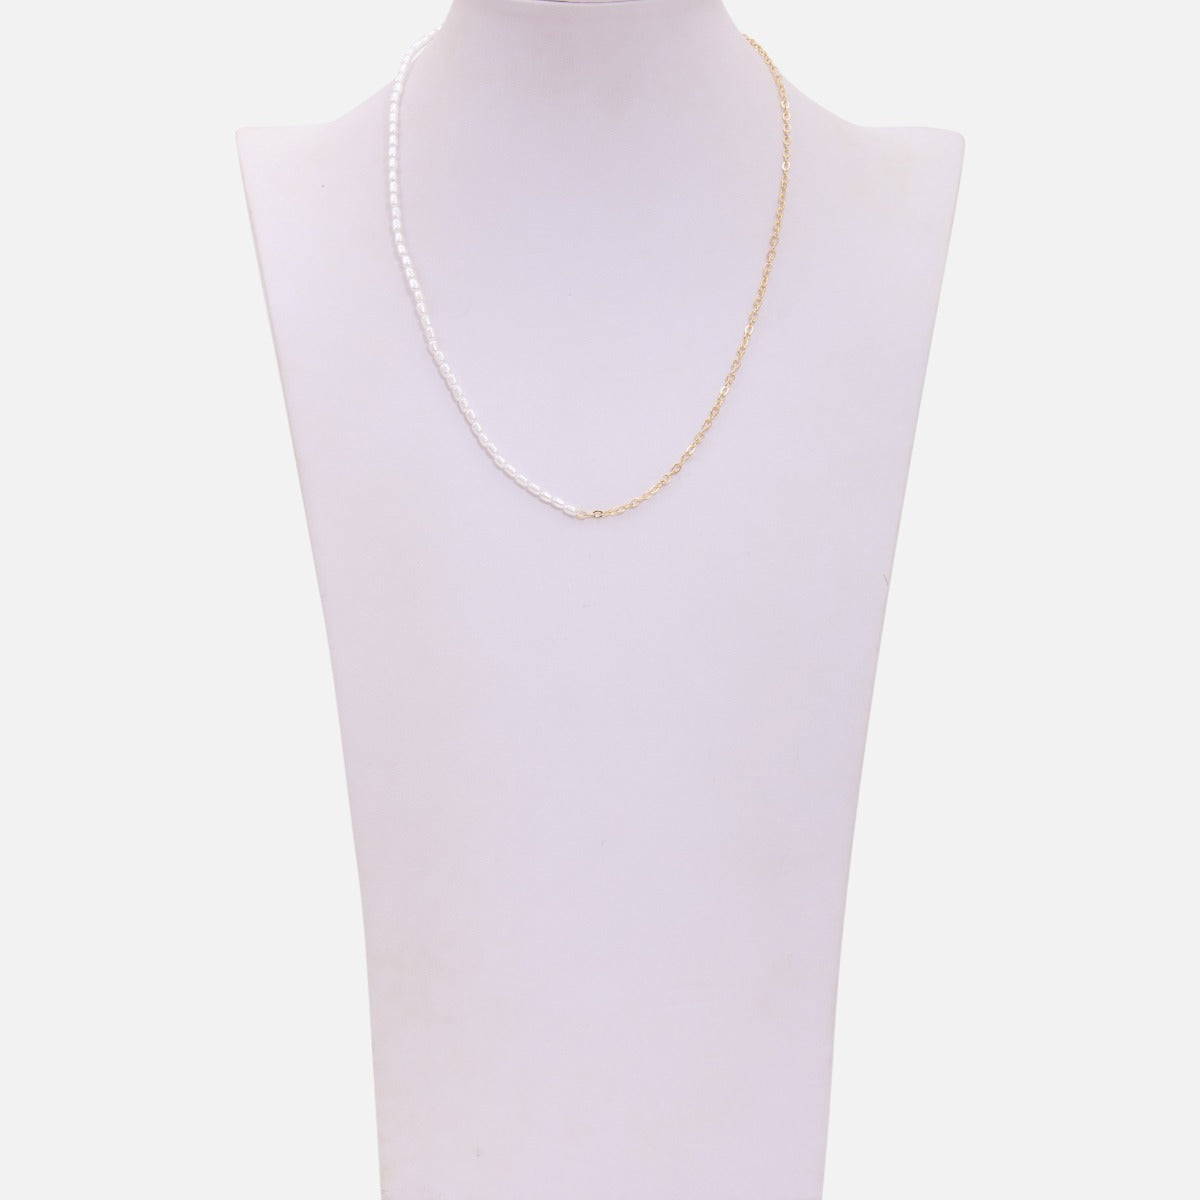 Necklace with half golden chain and half pearls